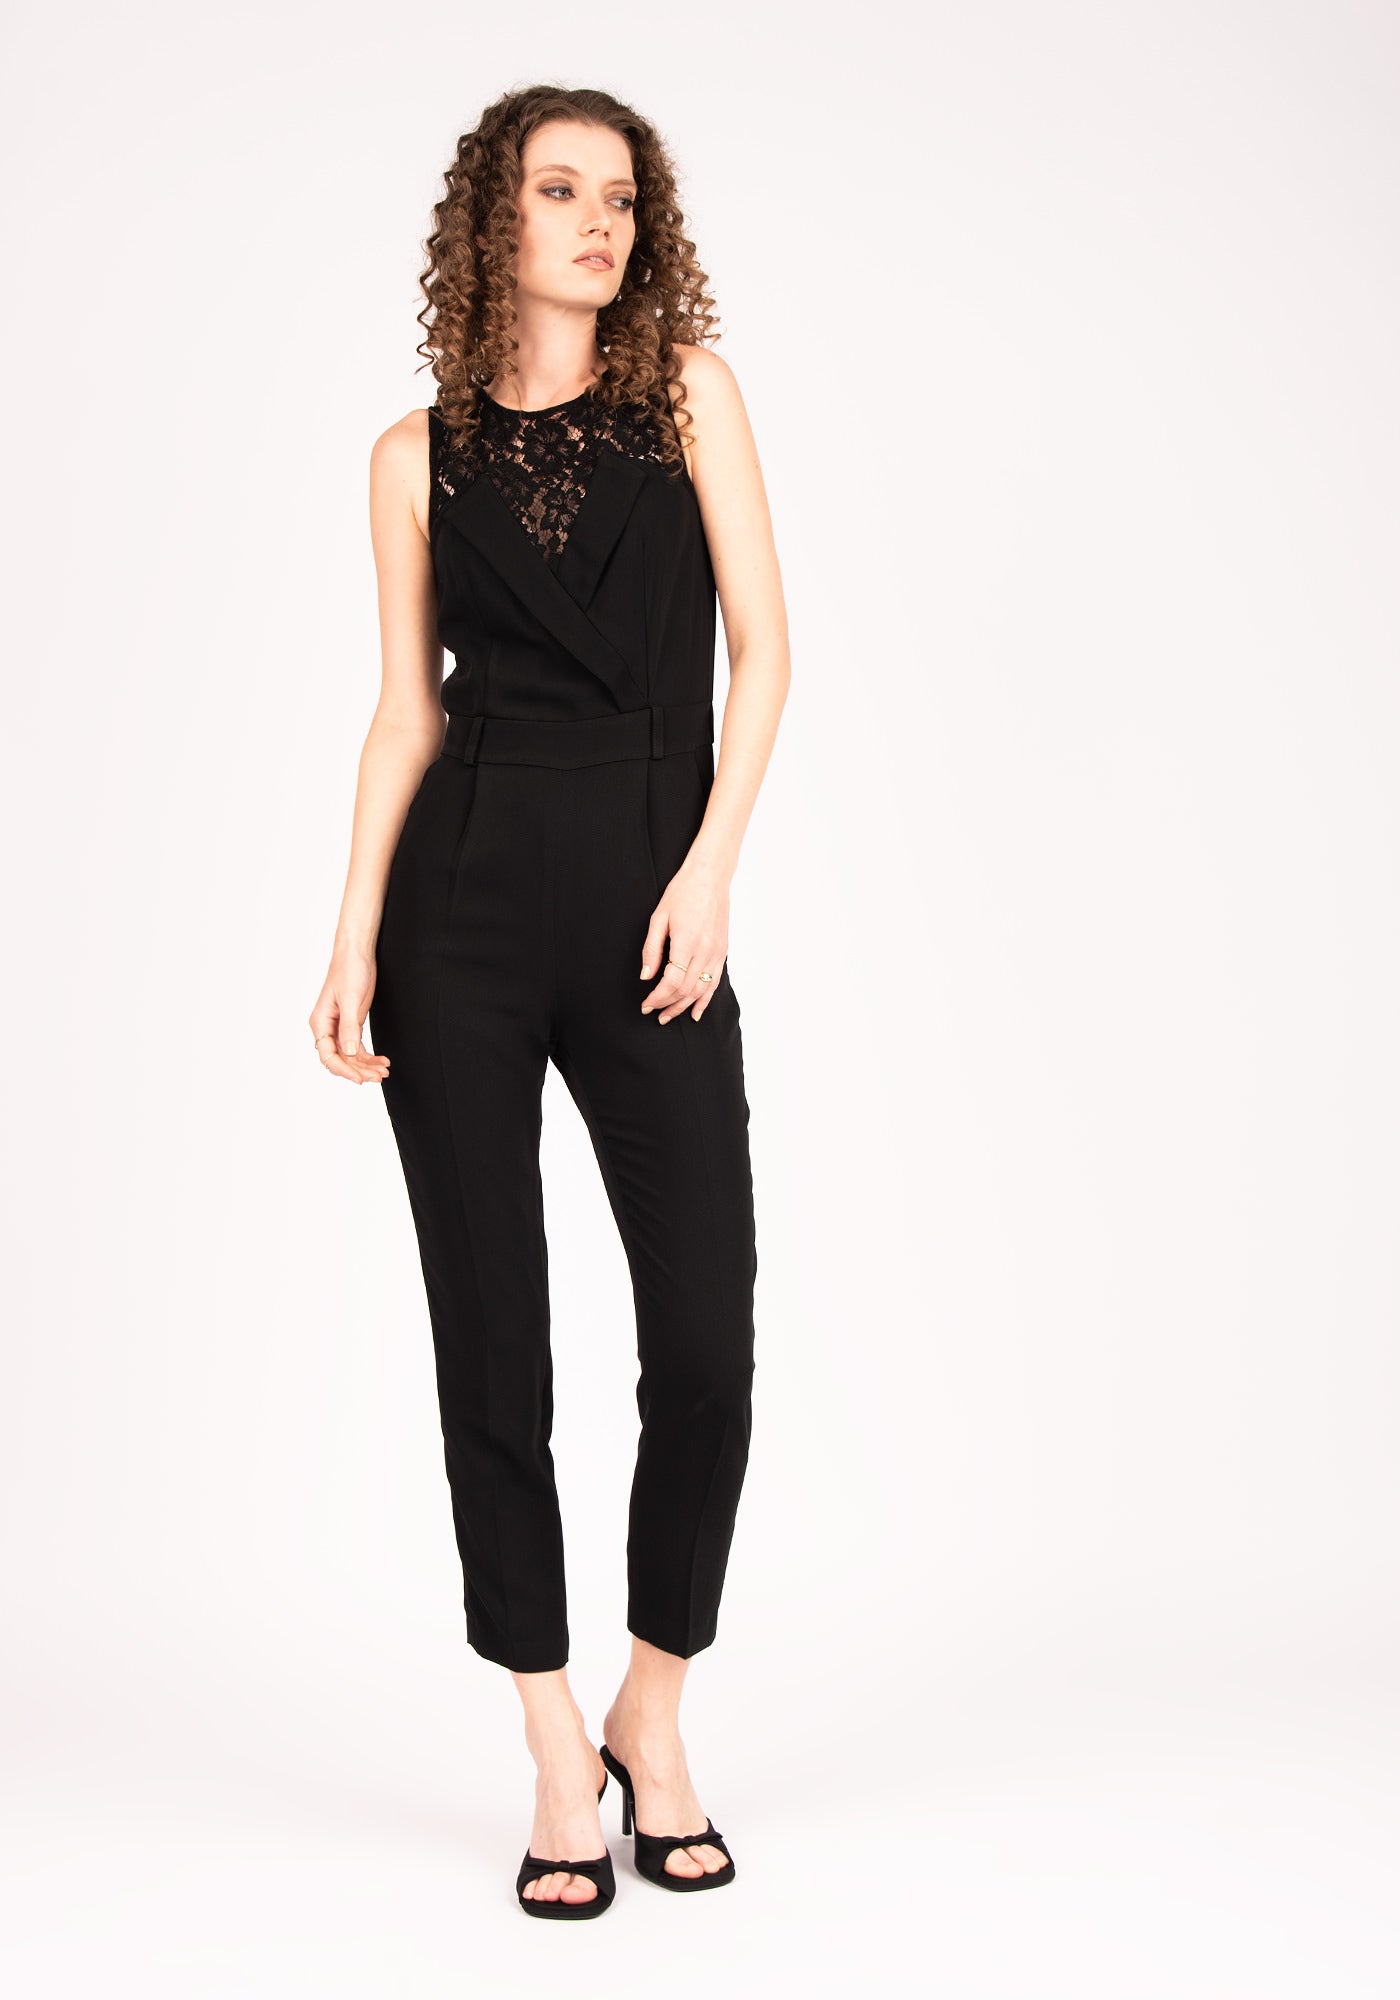 Women's Formal Jumpsuit with Lace Details in Black